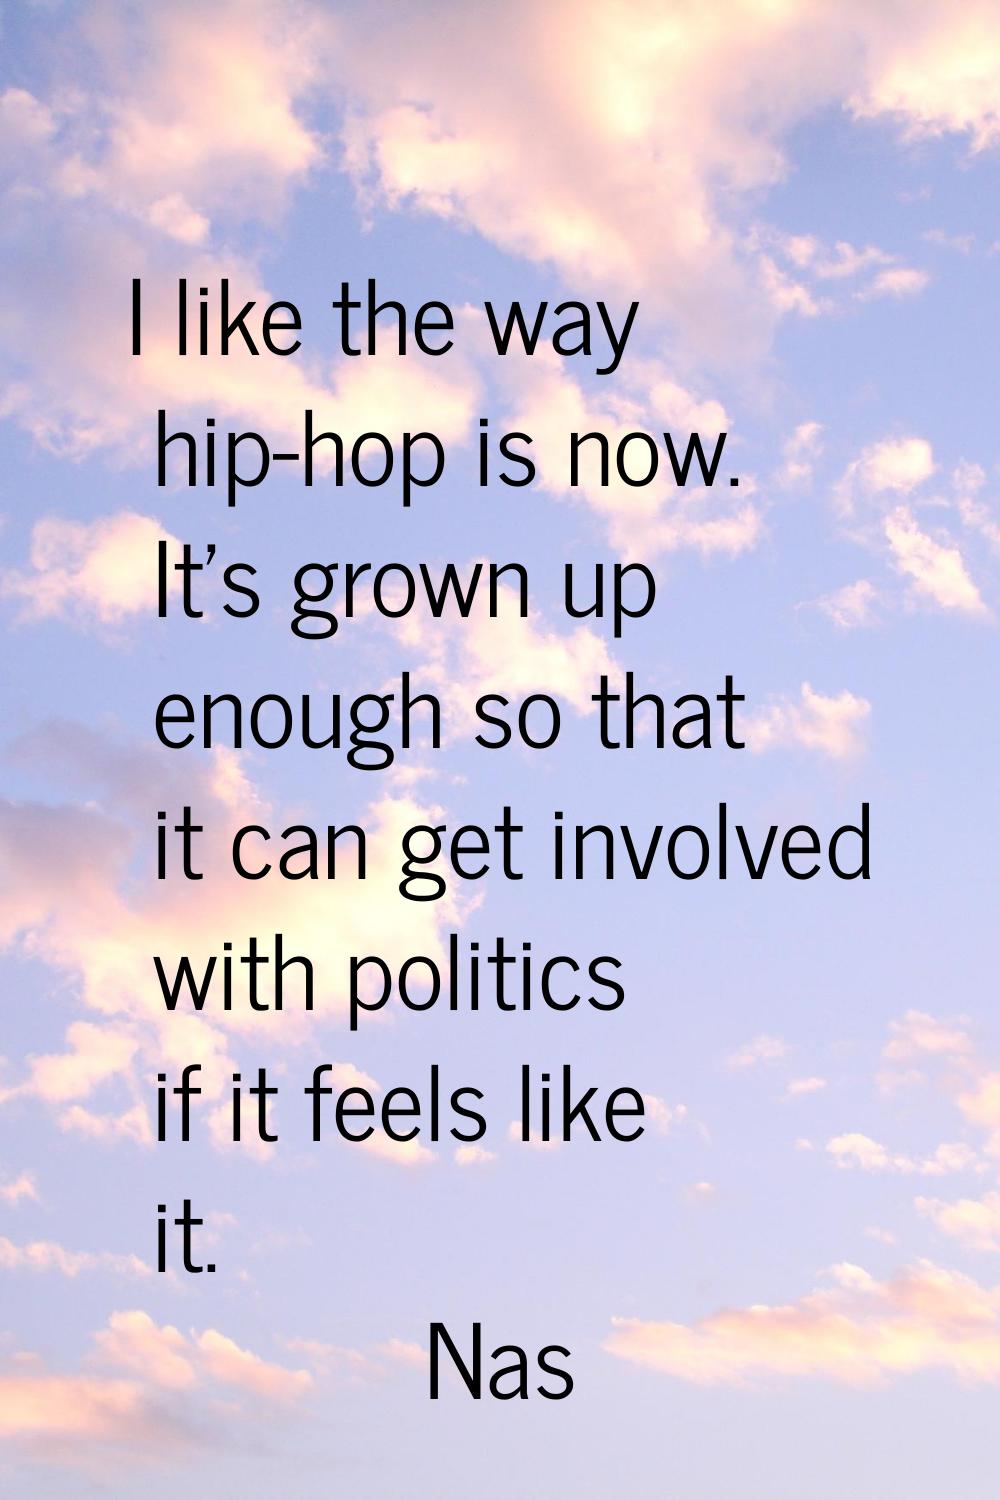 I like the way hip-hop is now. It's grown up enough so that it can get involved with politics if it